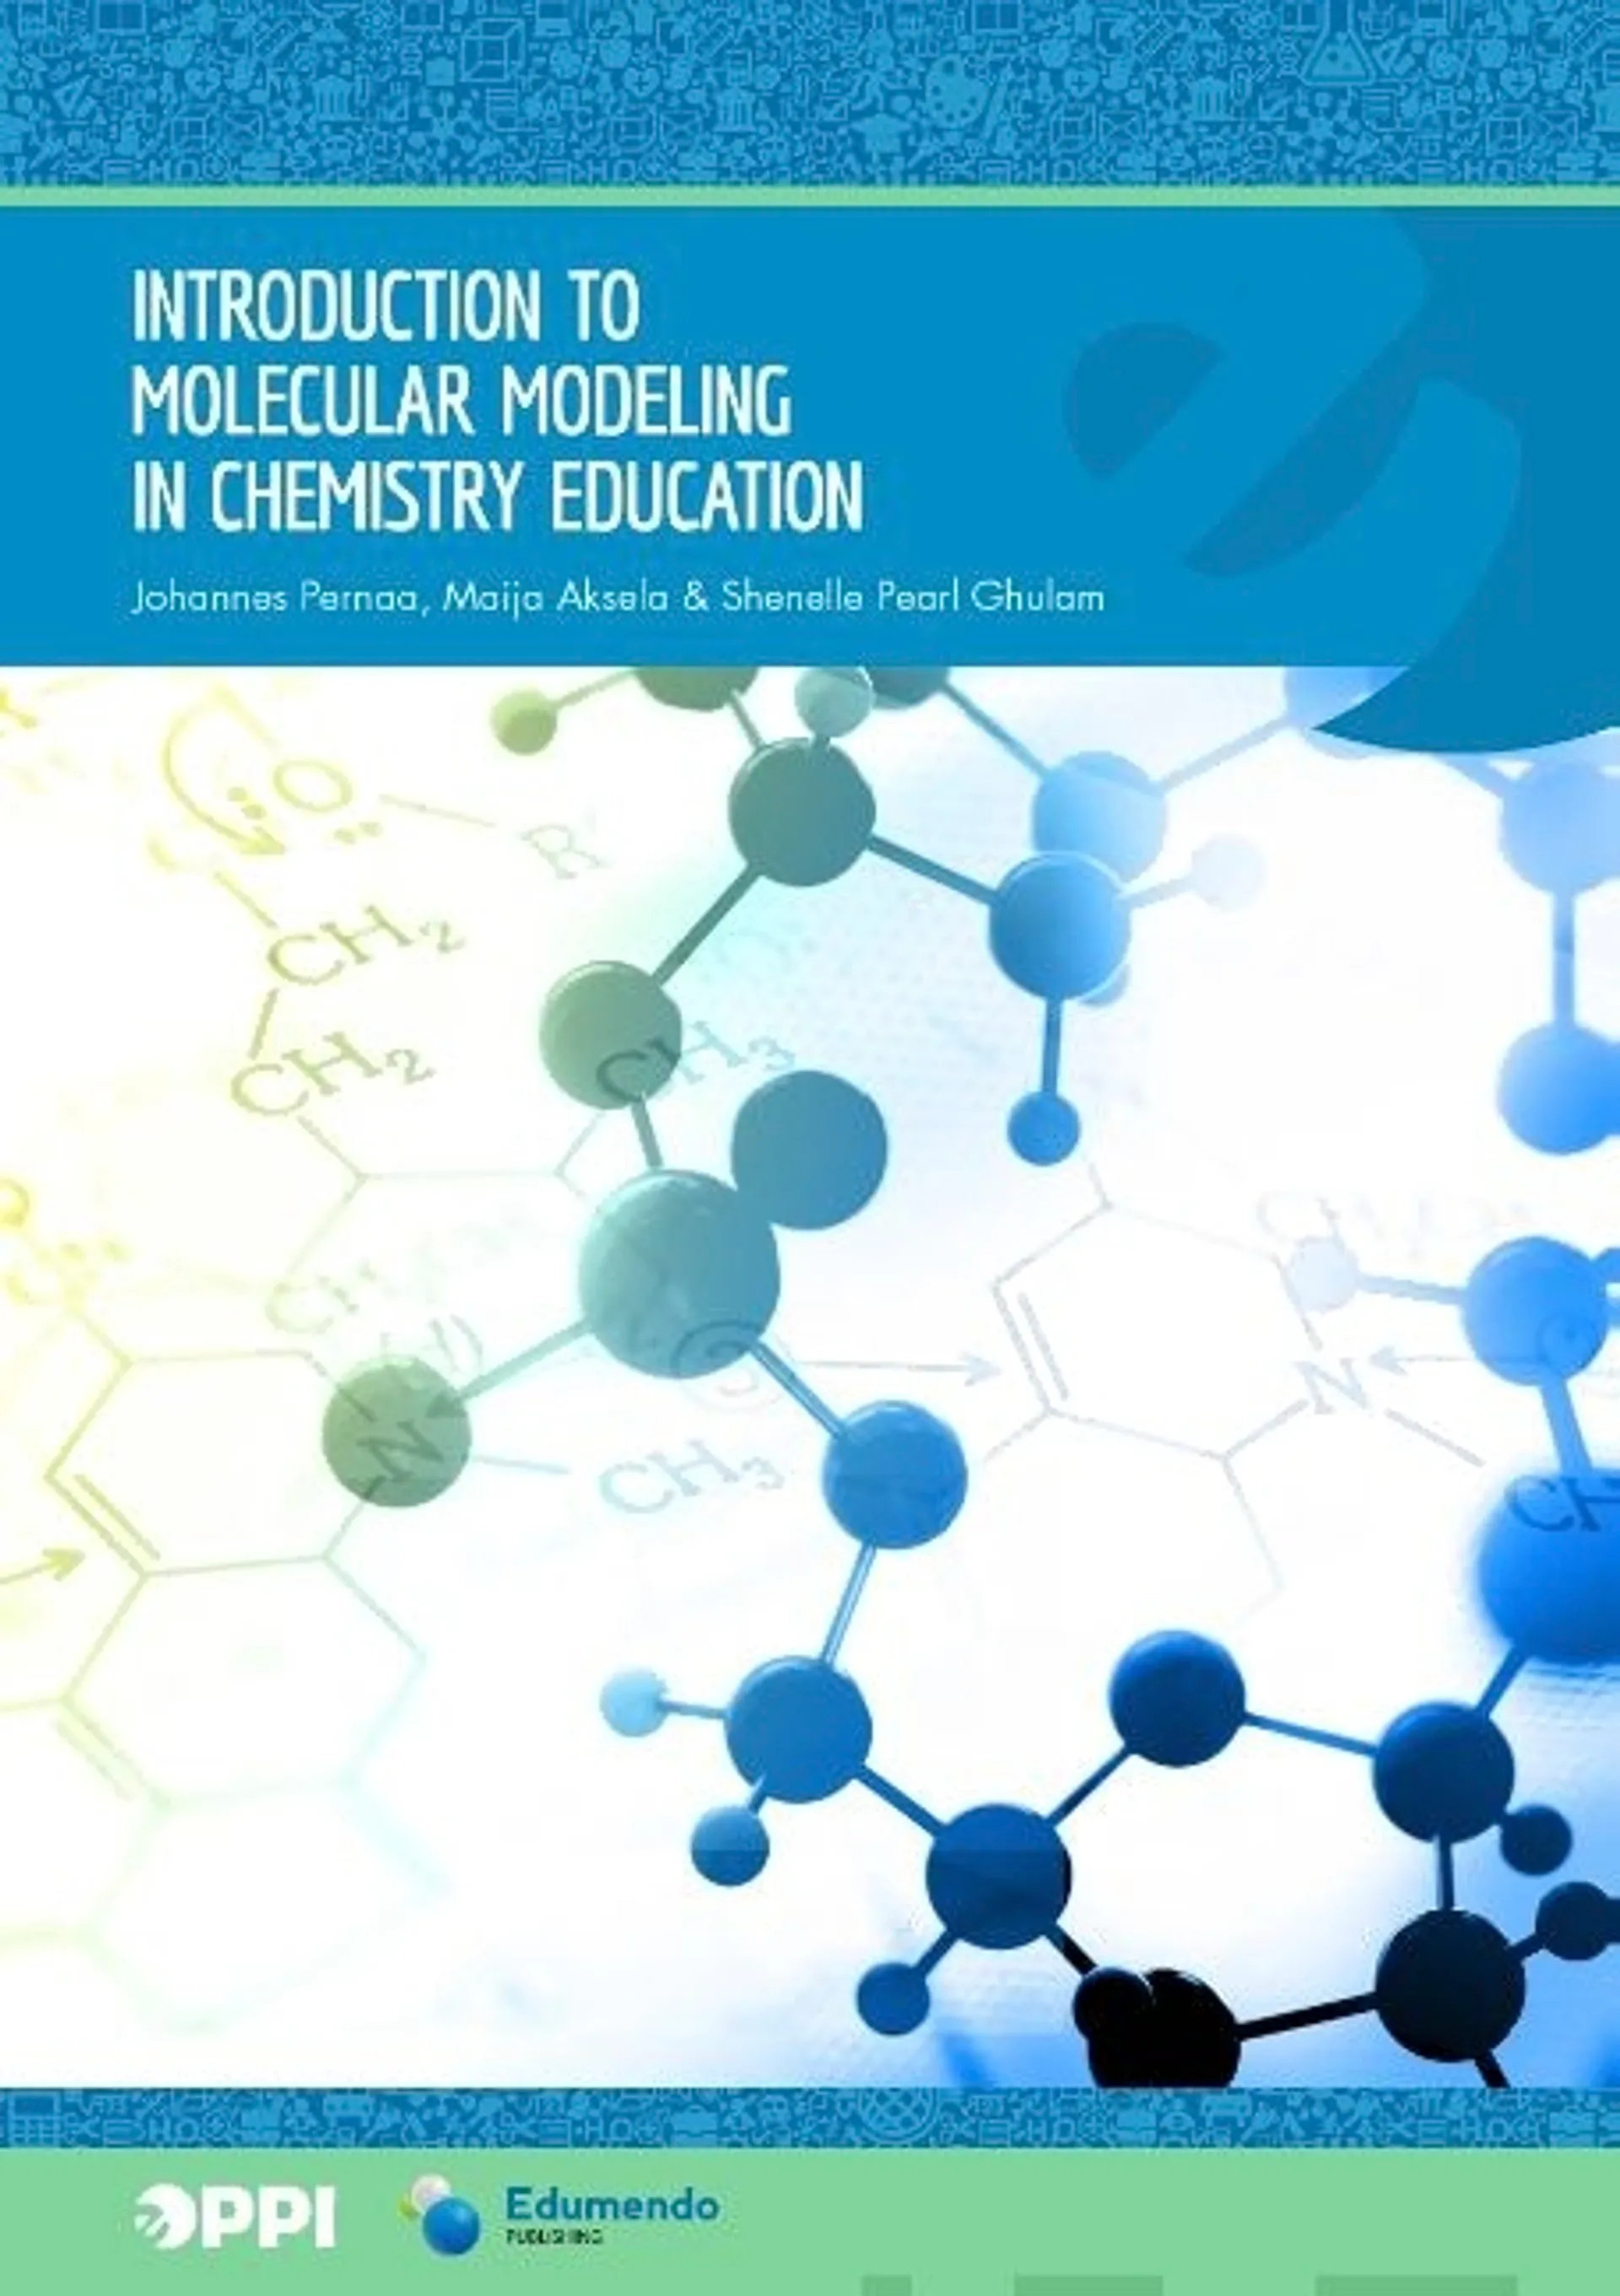 Aksela, Introduction to Molecular Modeling in Chemistry Education